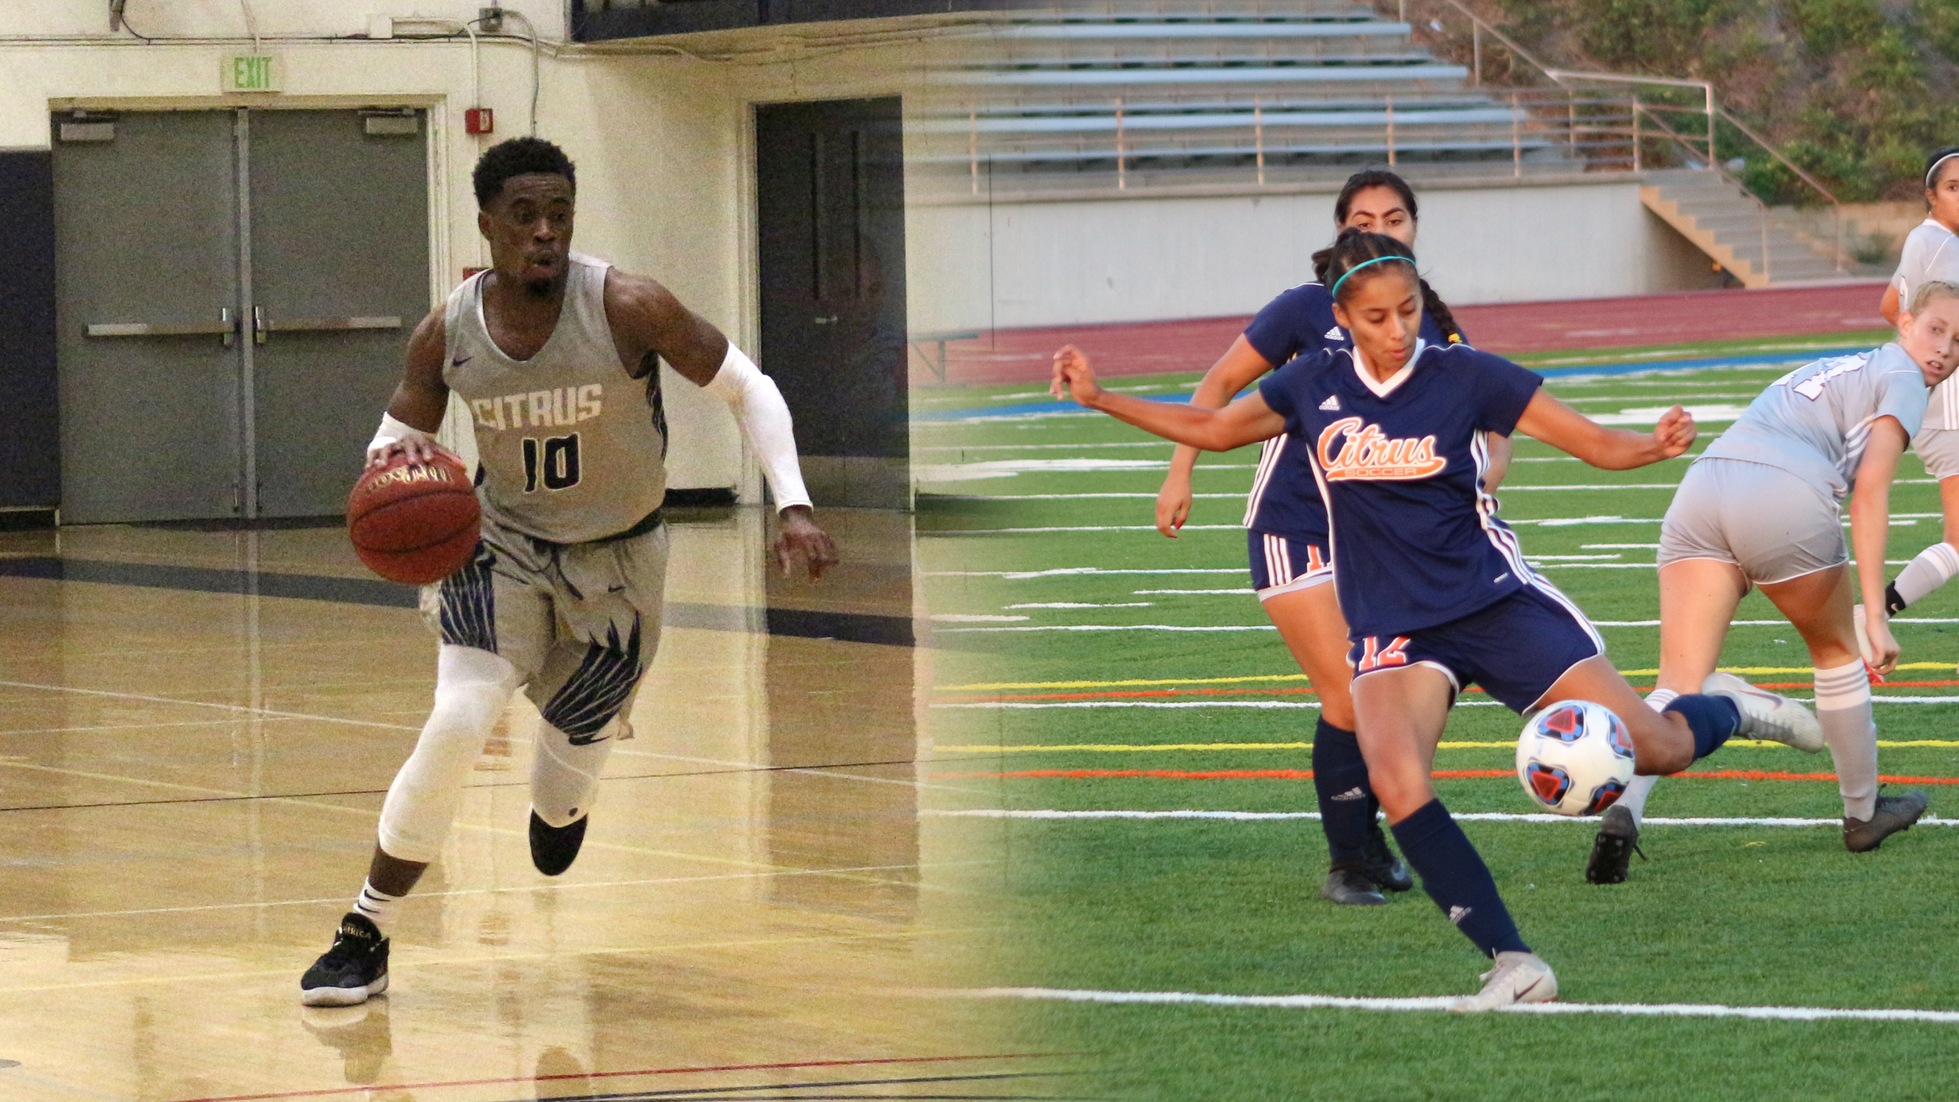 Toby Okwuokei and Zeanna Silva were named the Citrus College Athletes of the Year.